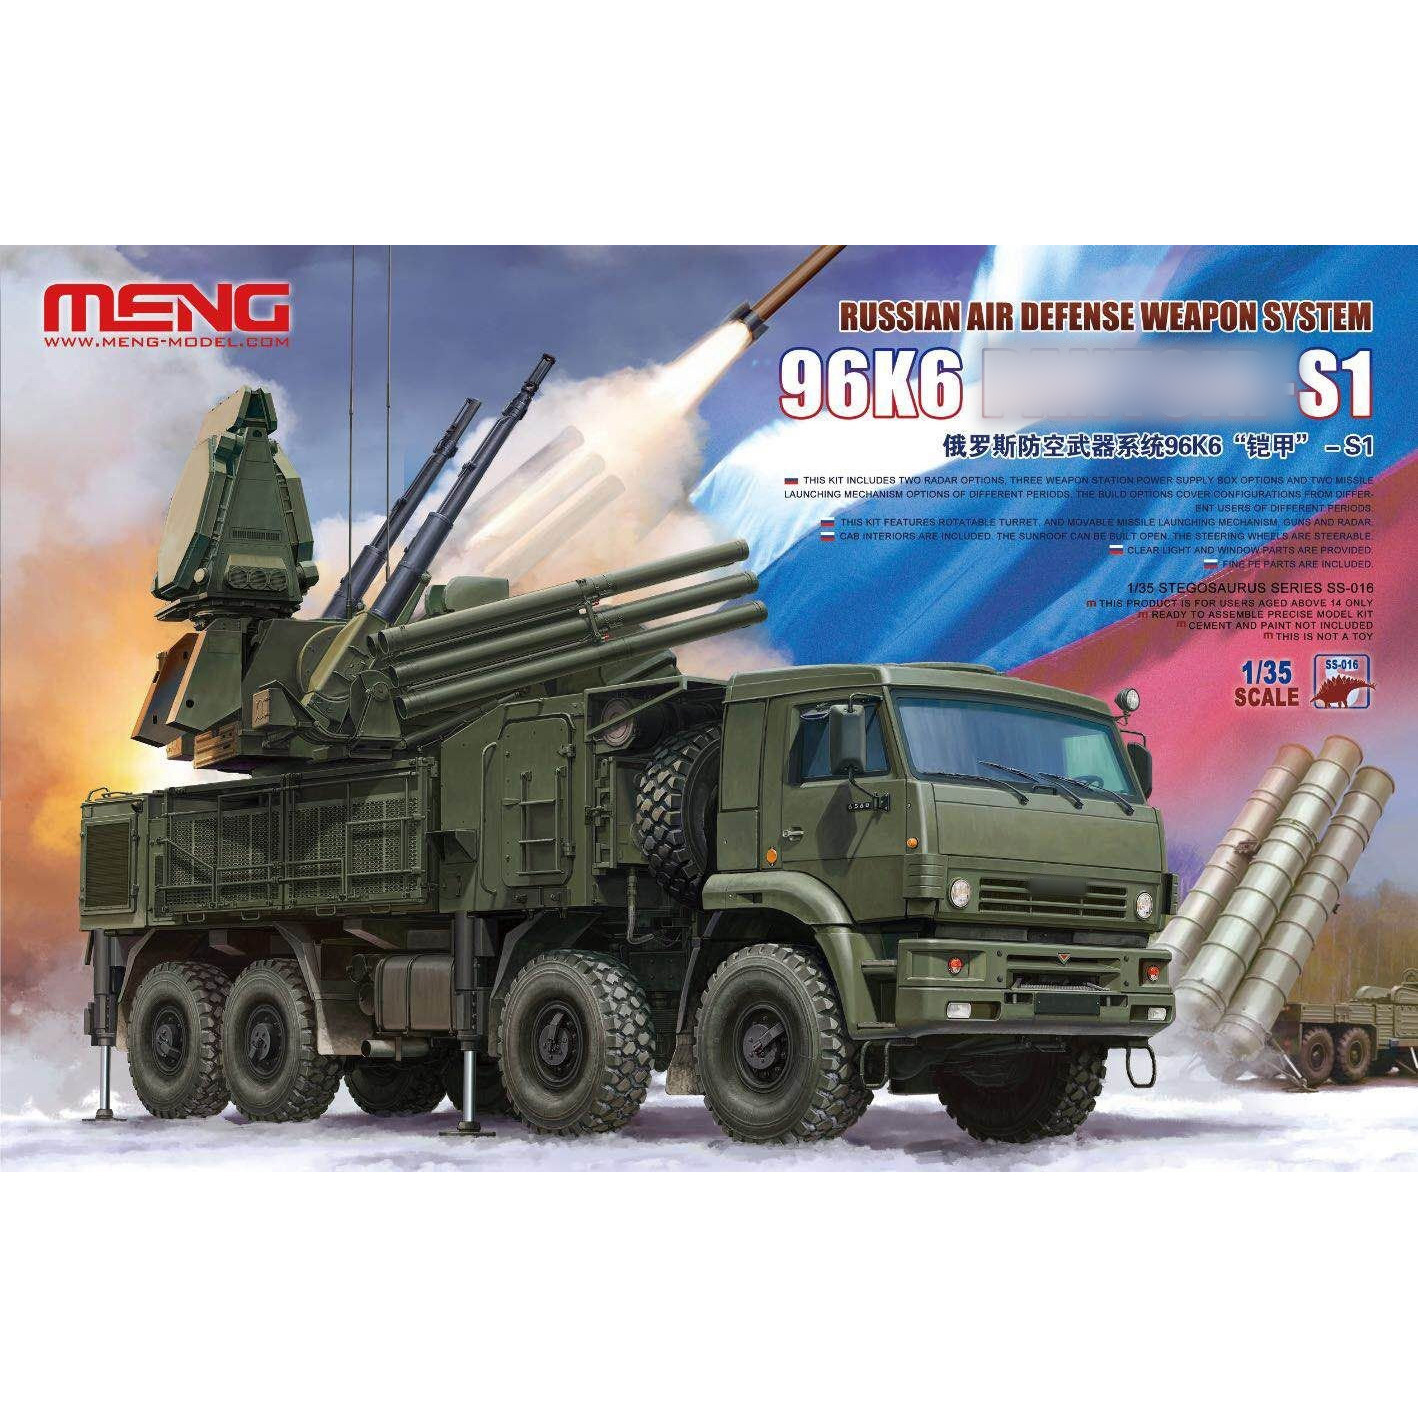 SS-016 Meng 1/35 Russian Air Defence Weapon System ЗРПК 9к6